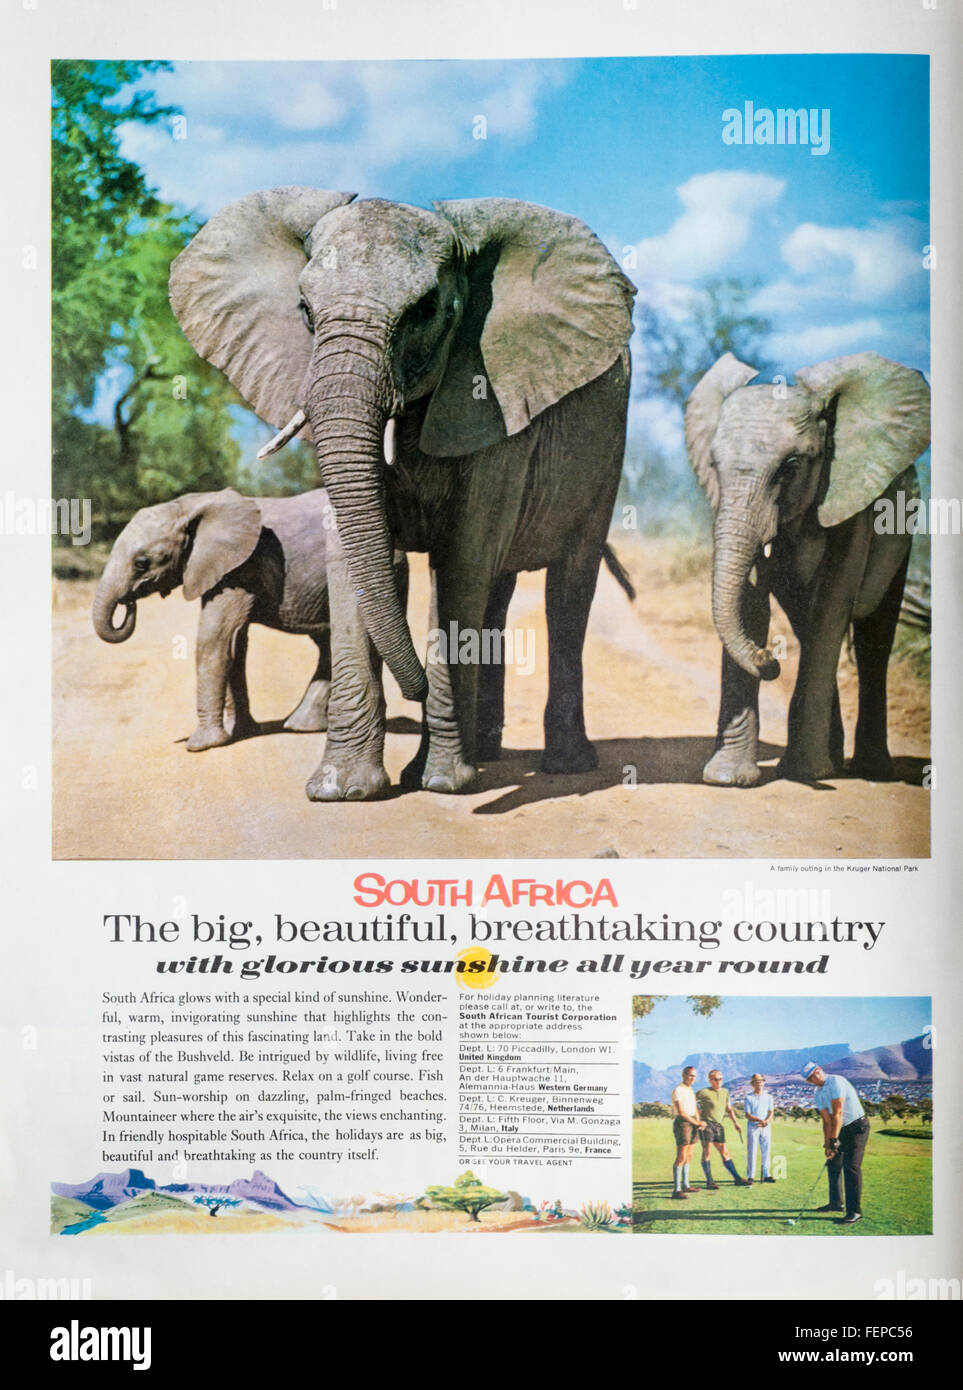 1960s magazine advertisement advertising travel to South Africa. Stock Photo